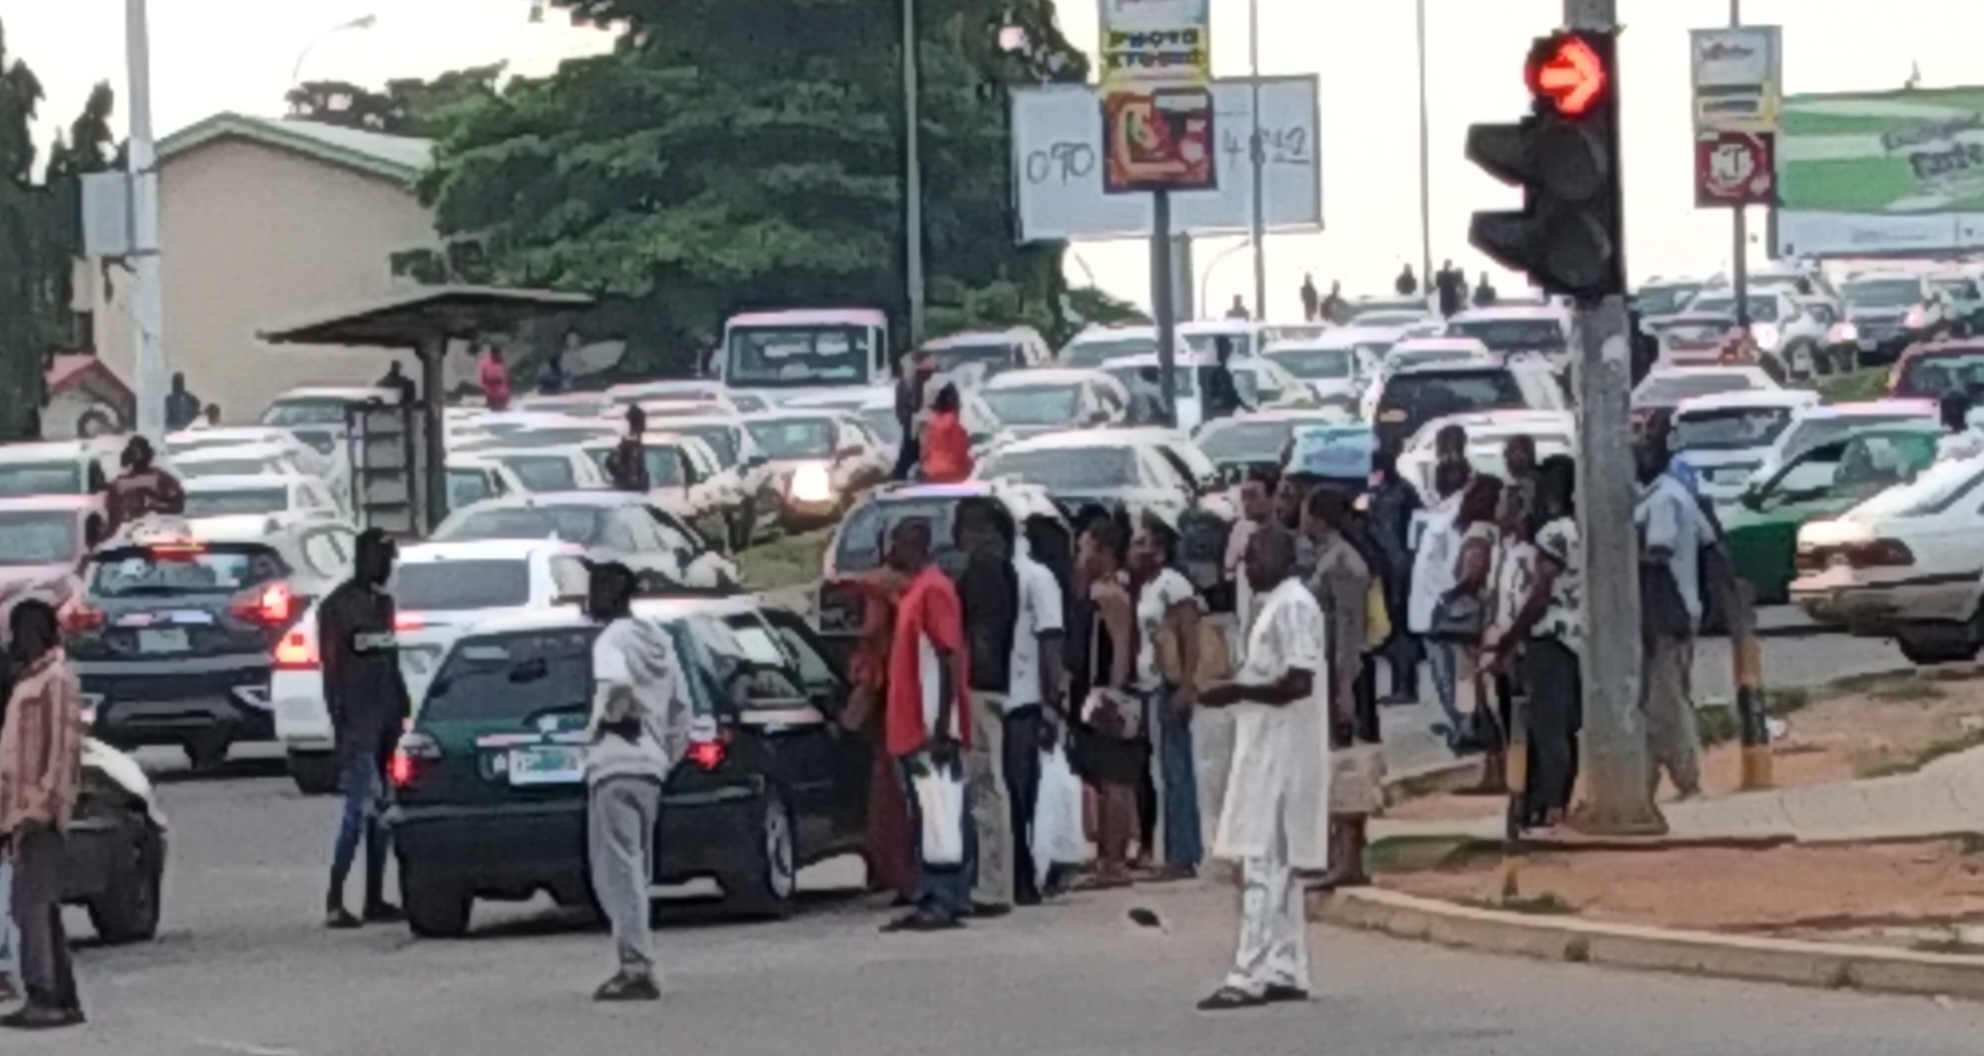 Passengers usually struggle to board cabs during rush hour periods - in the morning when coming into Abuja city centre from the satellite towns and in the evenings when leaving the city for satellite towns.